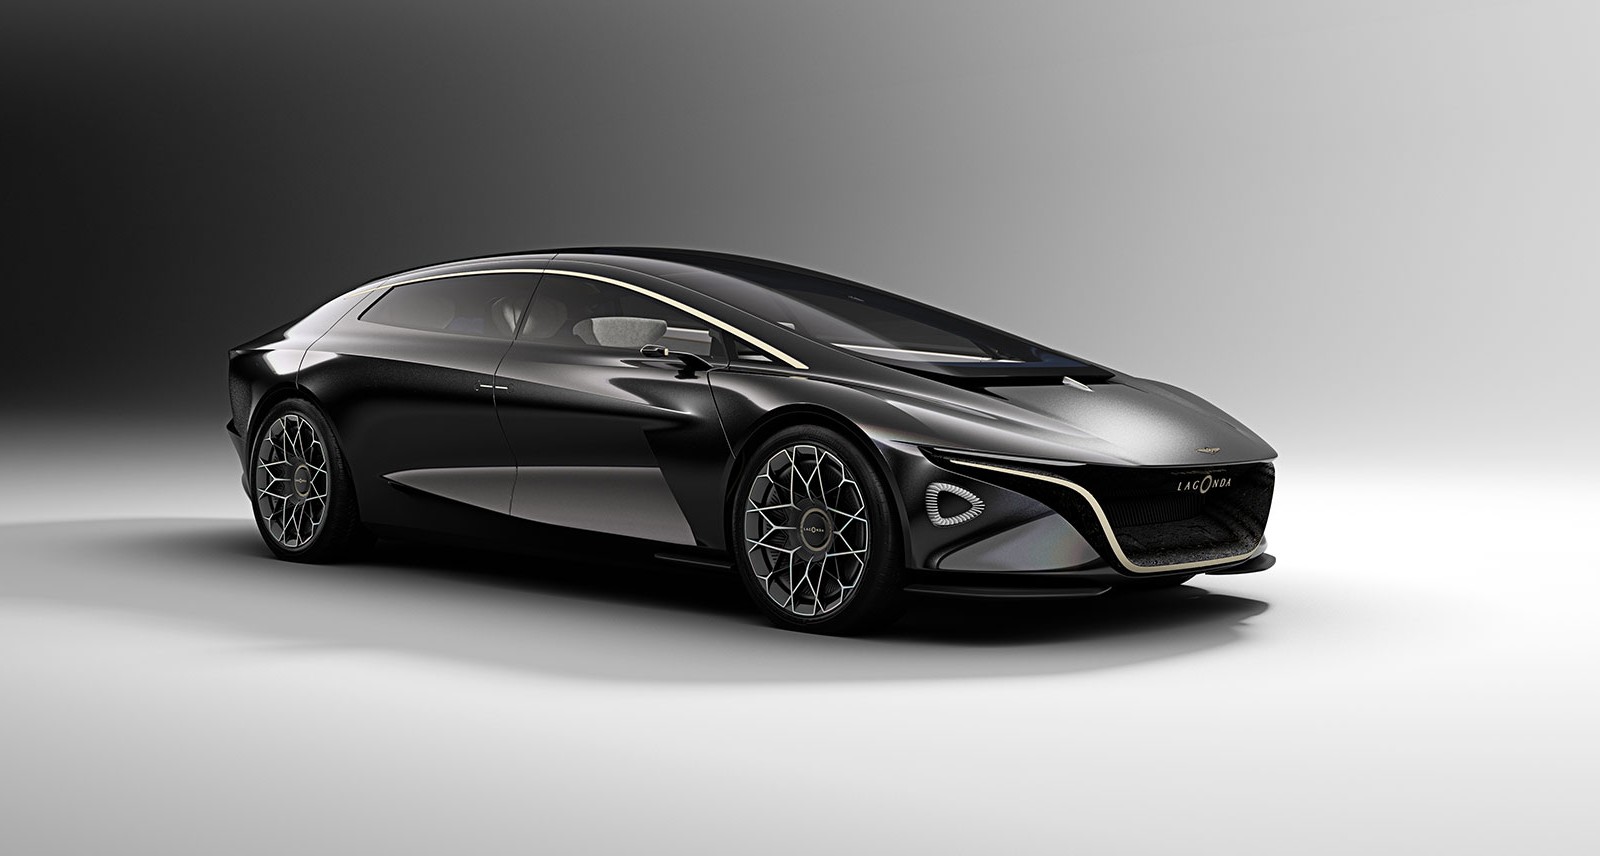 Behold the Lagonda Vision Concept, a Glimpse Into Aston Martin's Very Electric, Very Jetsons-y Future